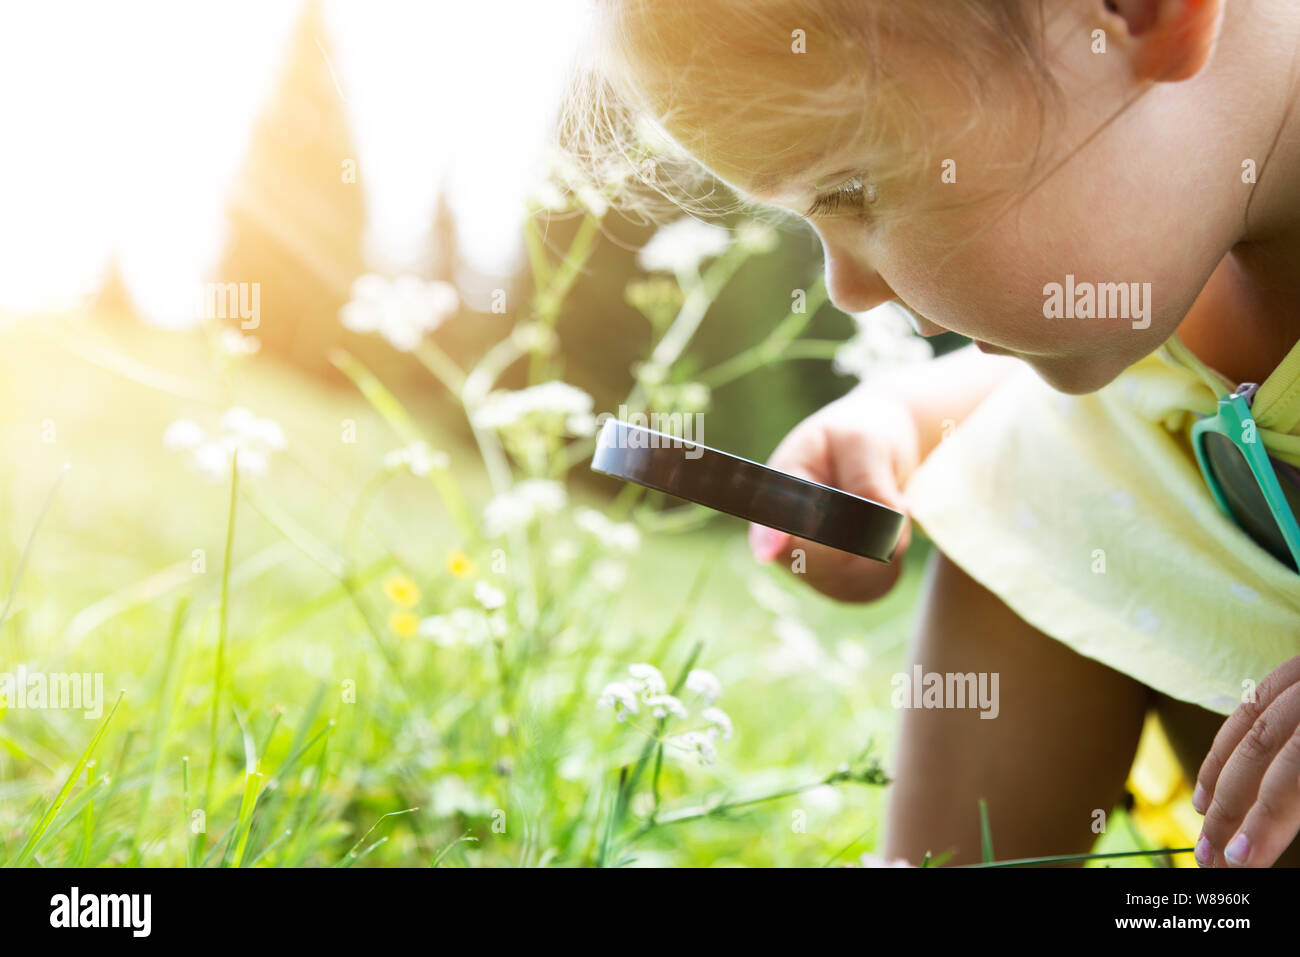 Little Girl Looking At Flower Through Magnifying Glass Stock Photo